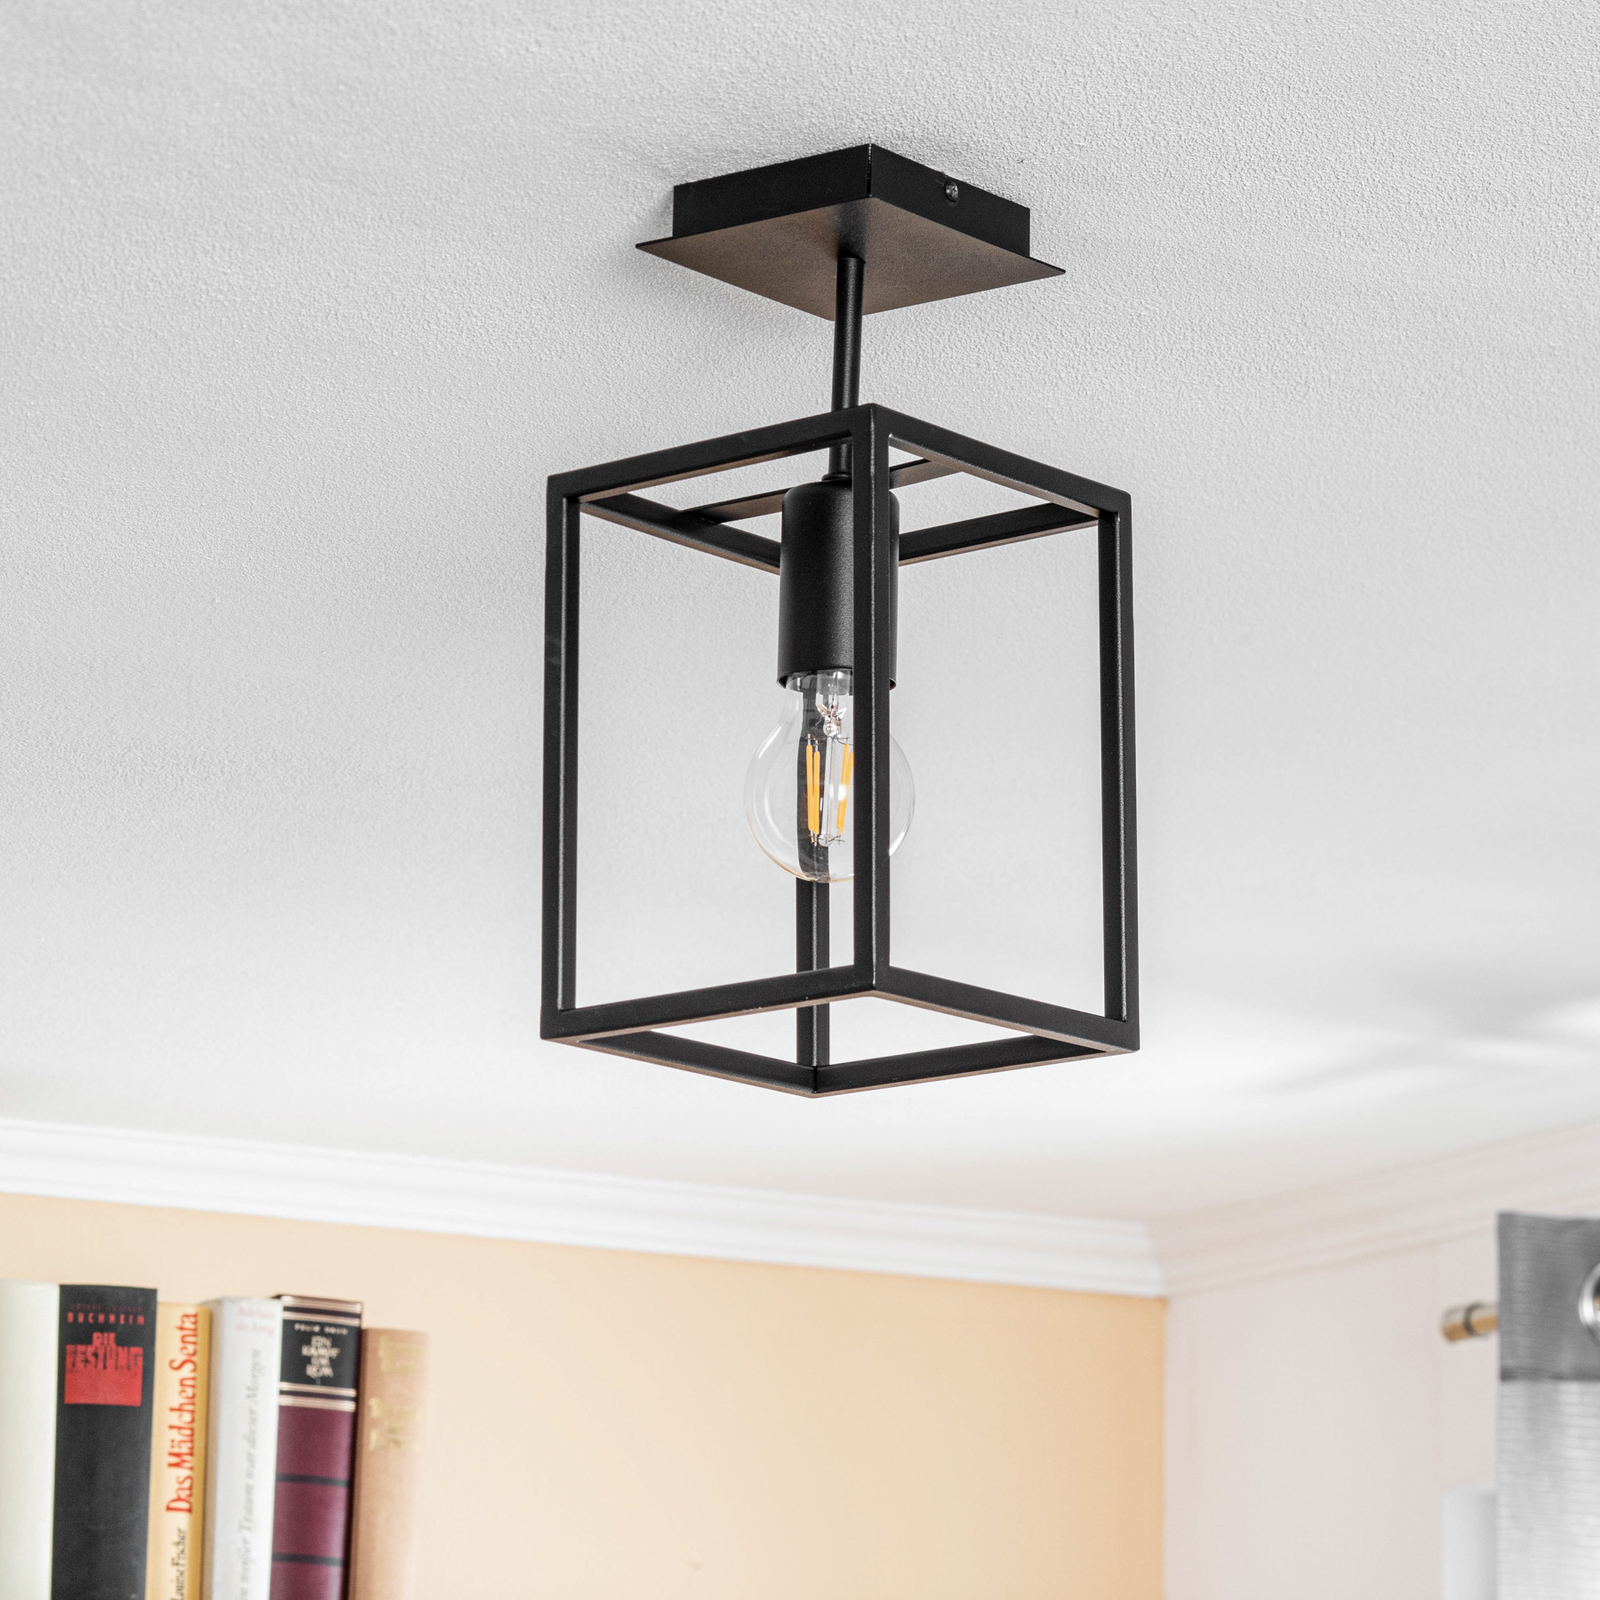 Crate ceiling light made of steel, one-bulb